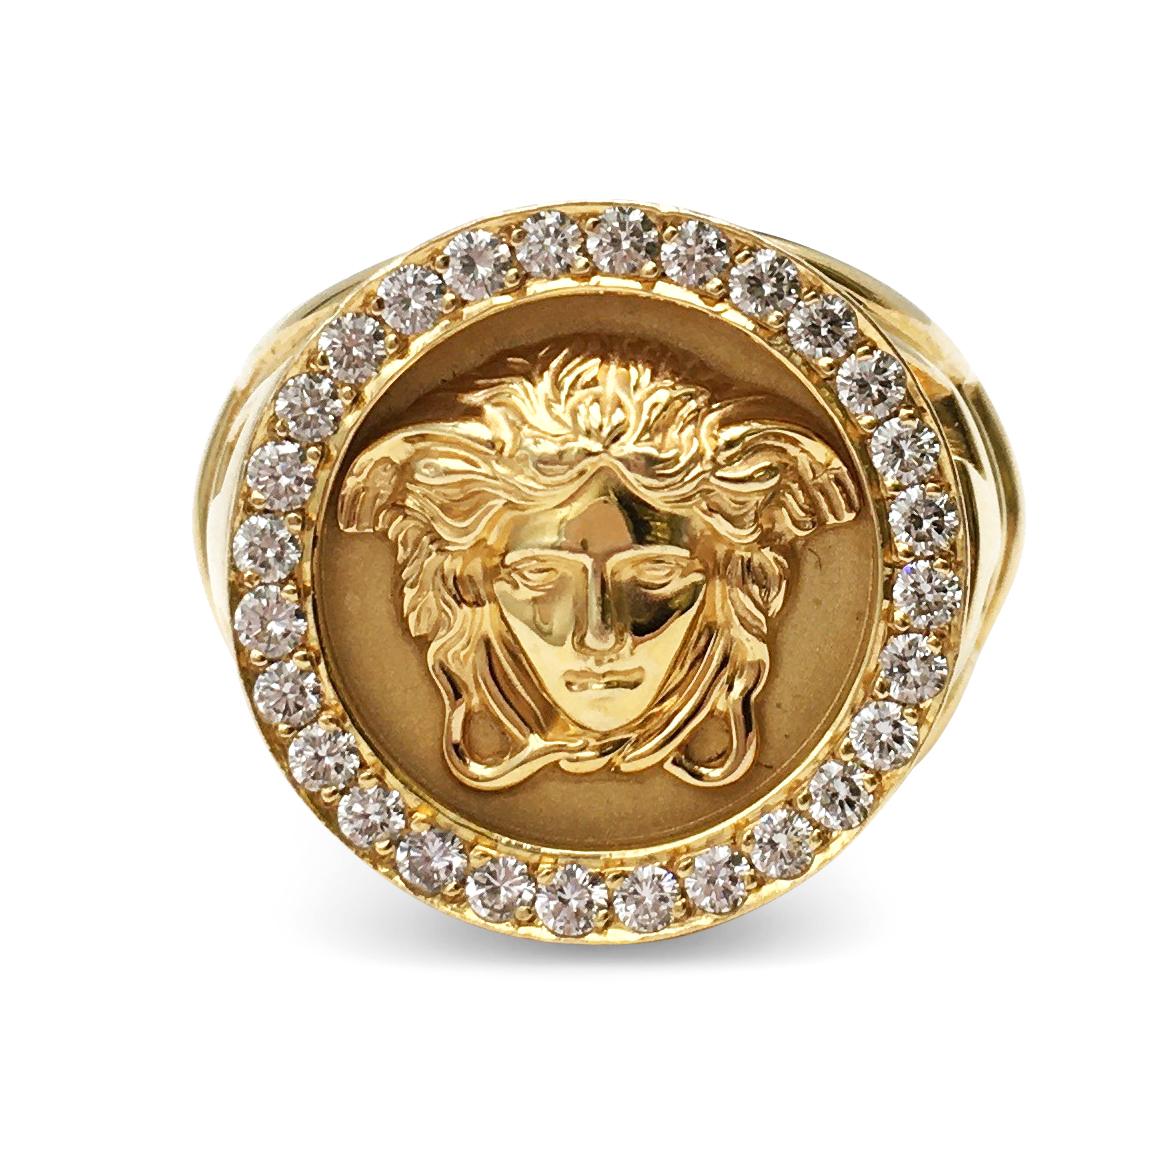 Authentic Gianni Versace ring crafted in 18 karat yellow gold centers on the iconic Medusa head which is surrounded by high-quality round brilliant cut diamonds weighing an estimated 0.80 carats total weight. Signed Gianni Versace, 18K 750. Ring